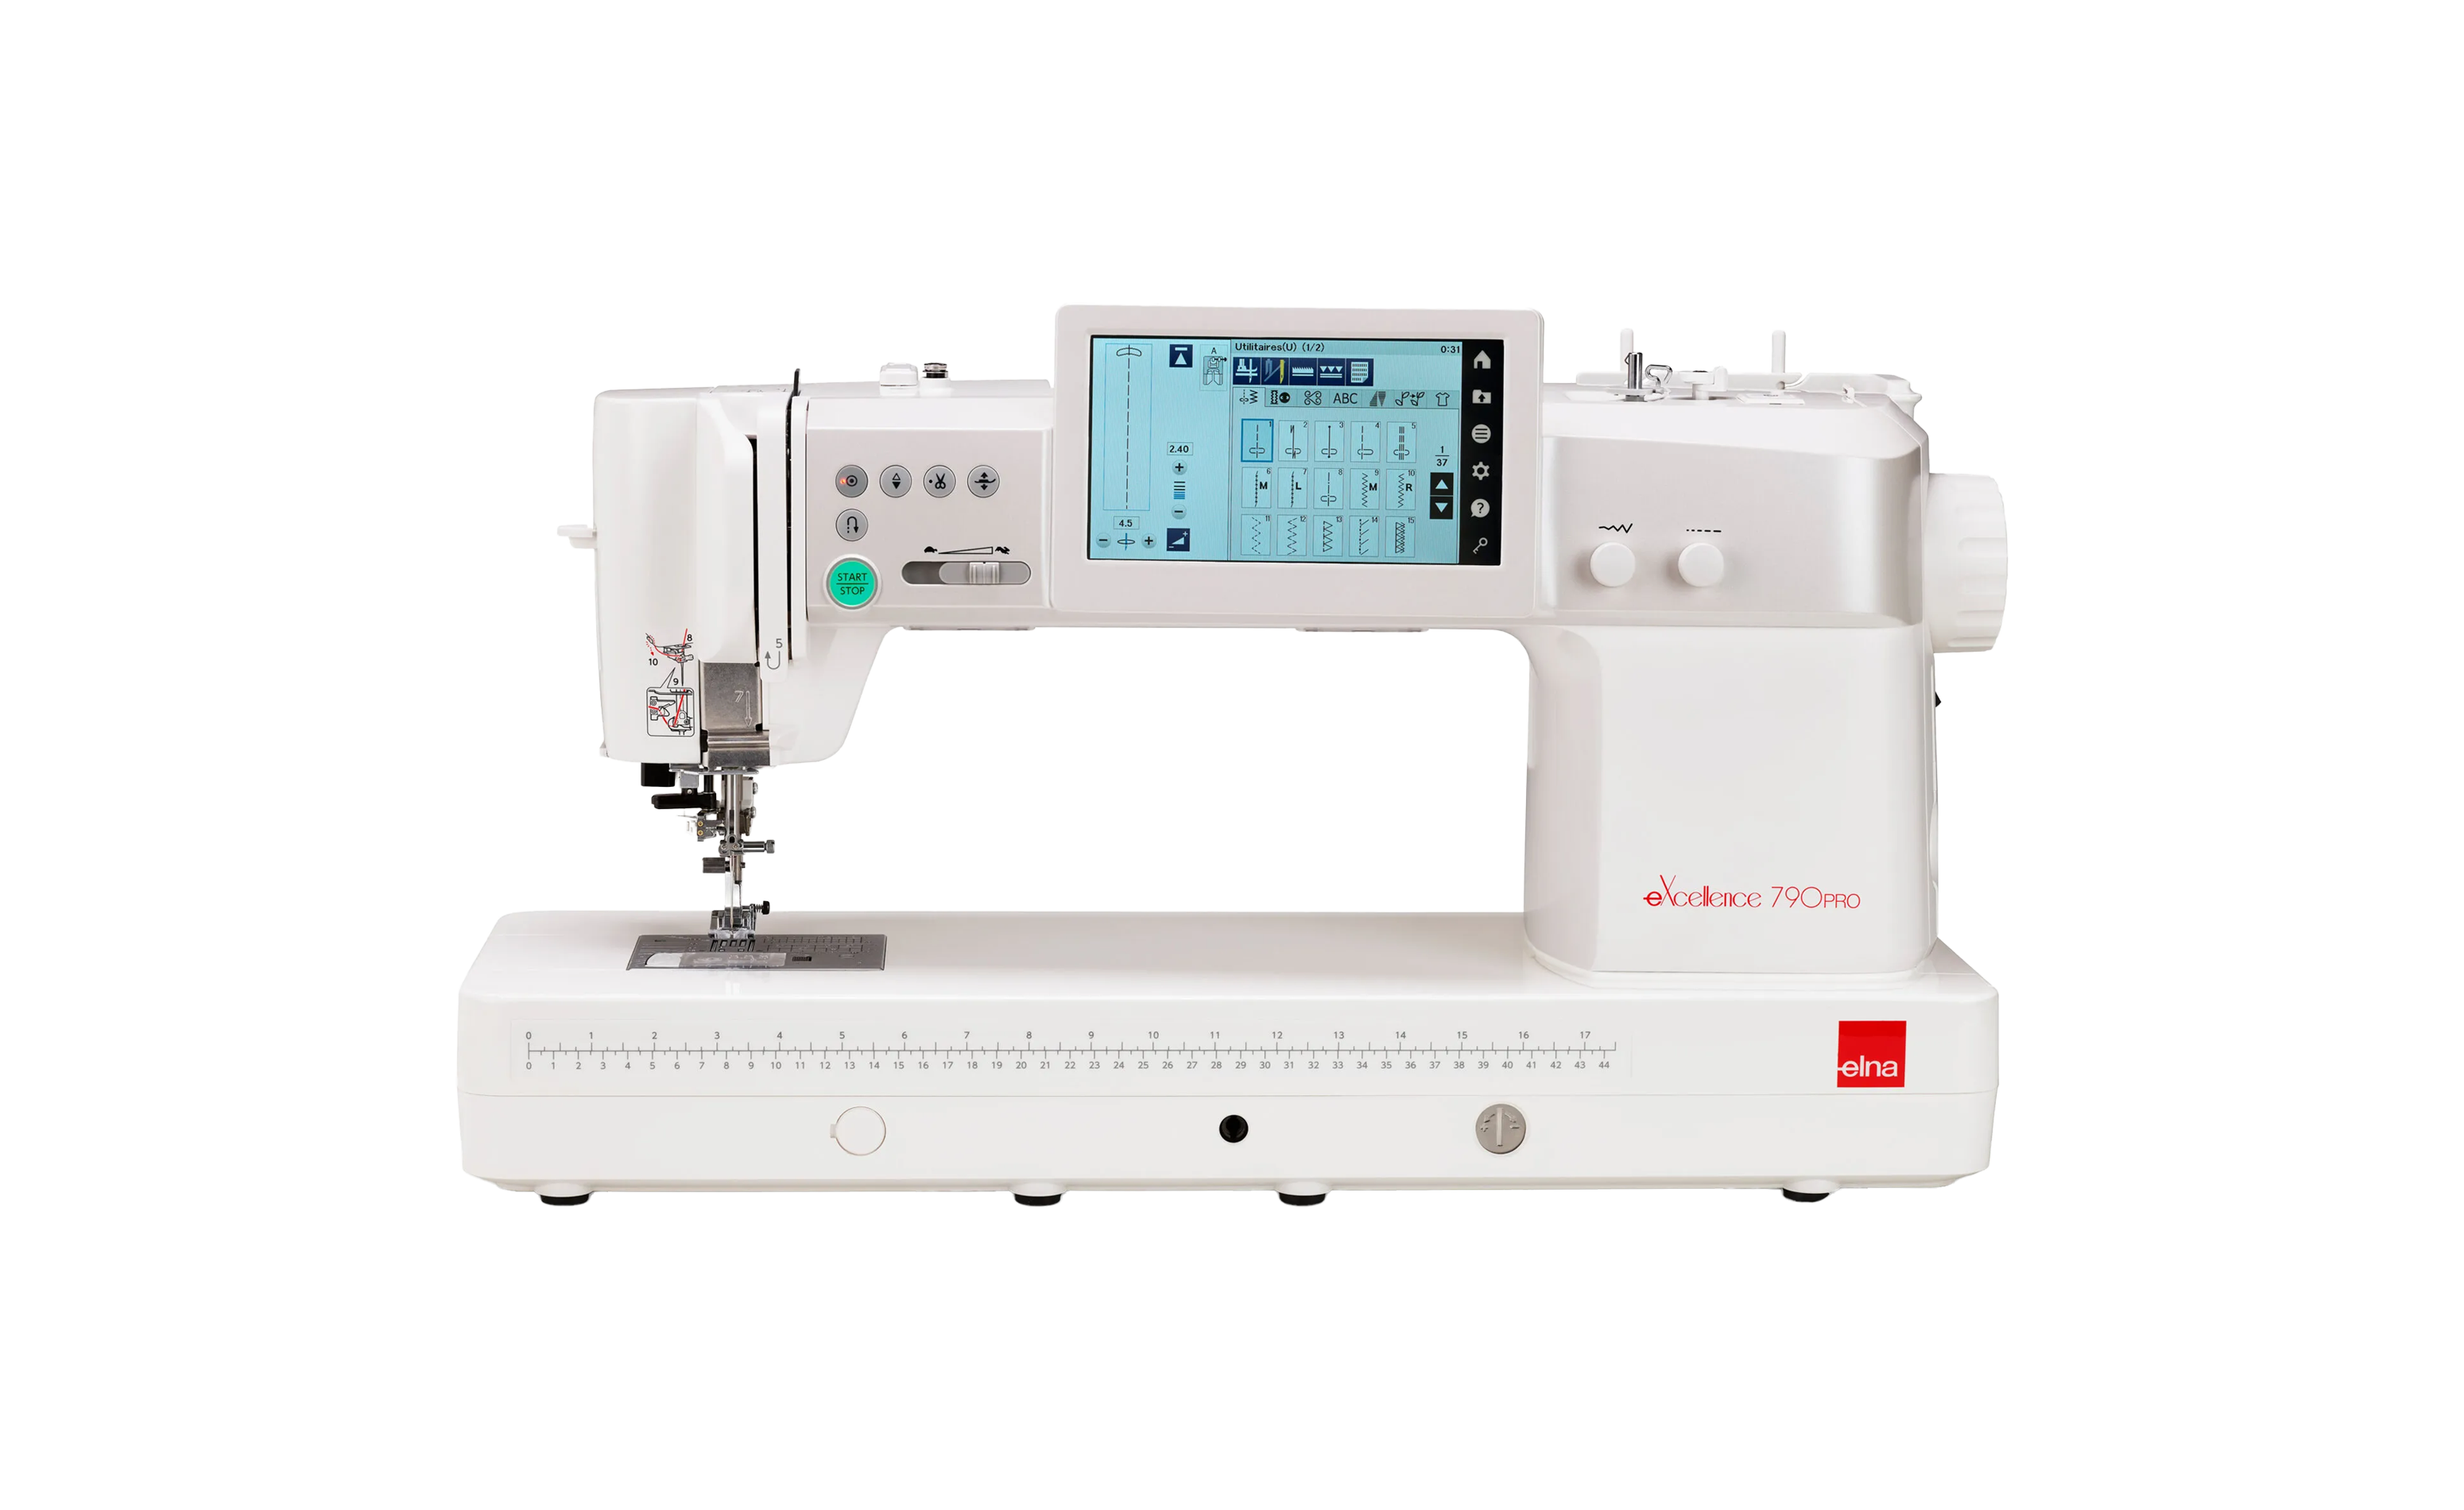 elna eXcellence 790 Pro Sewing Machine